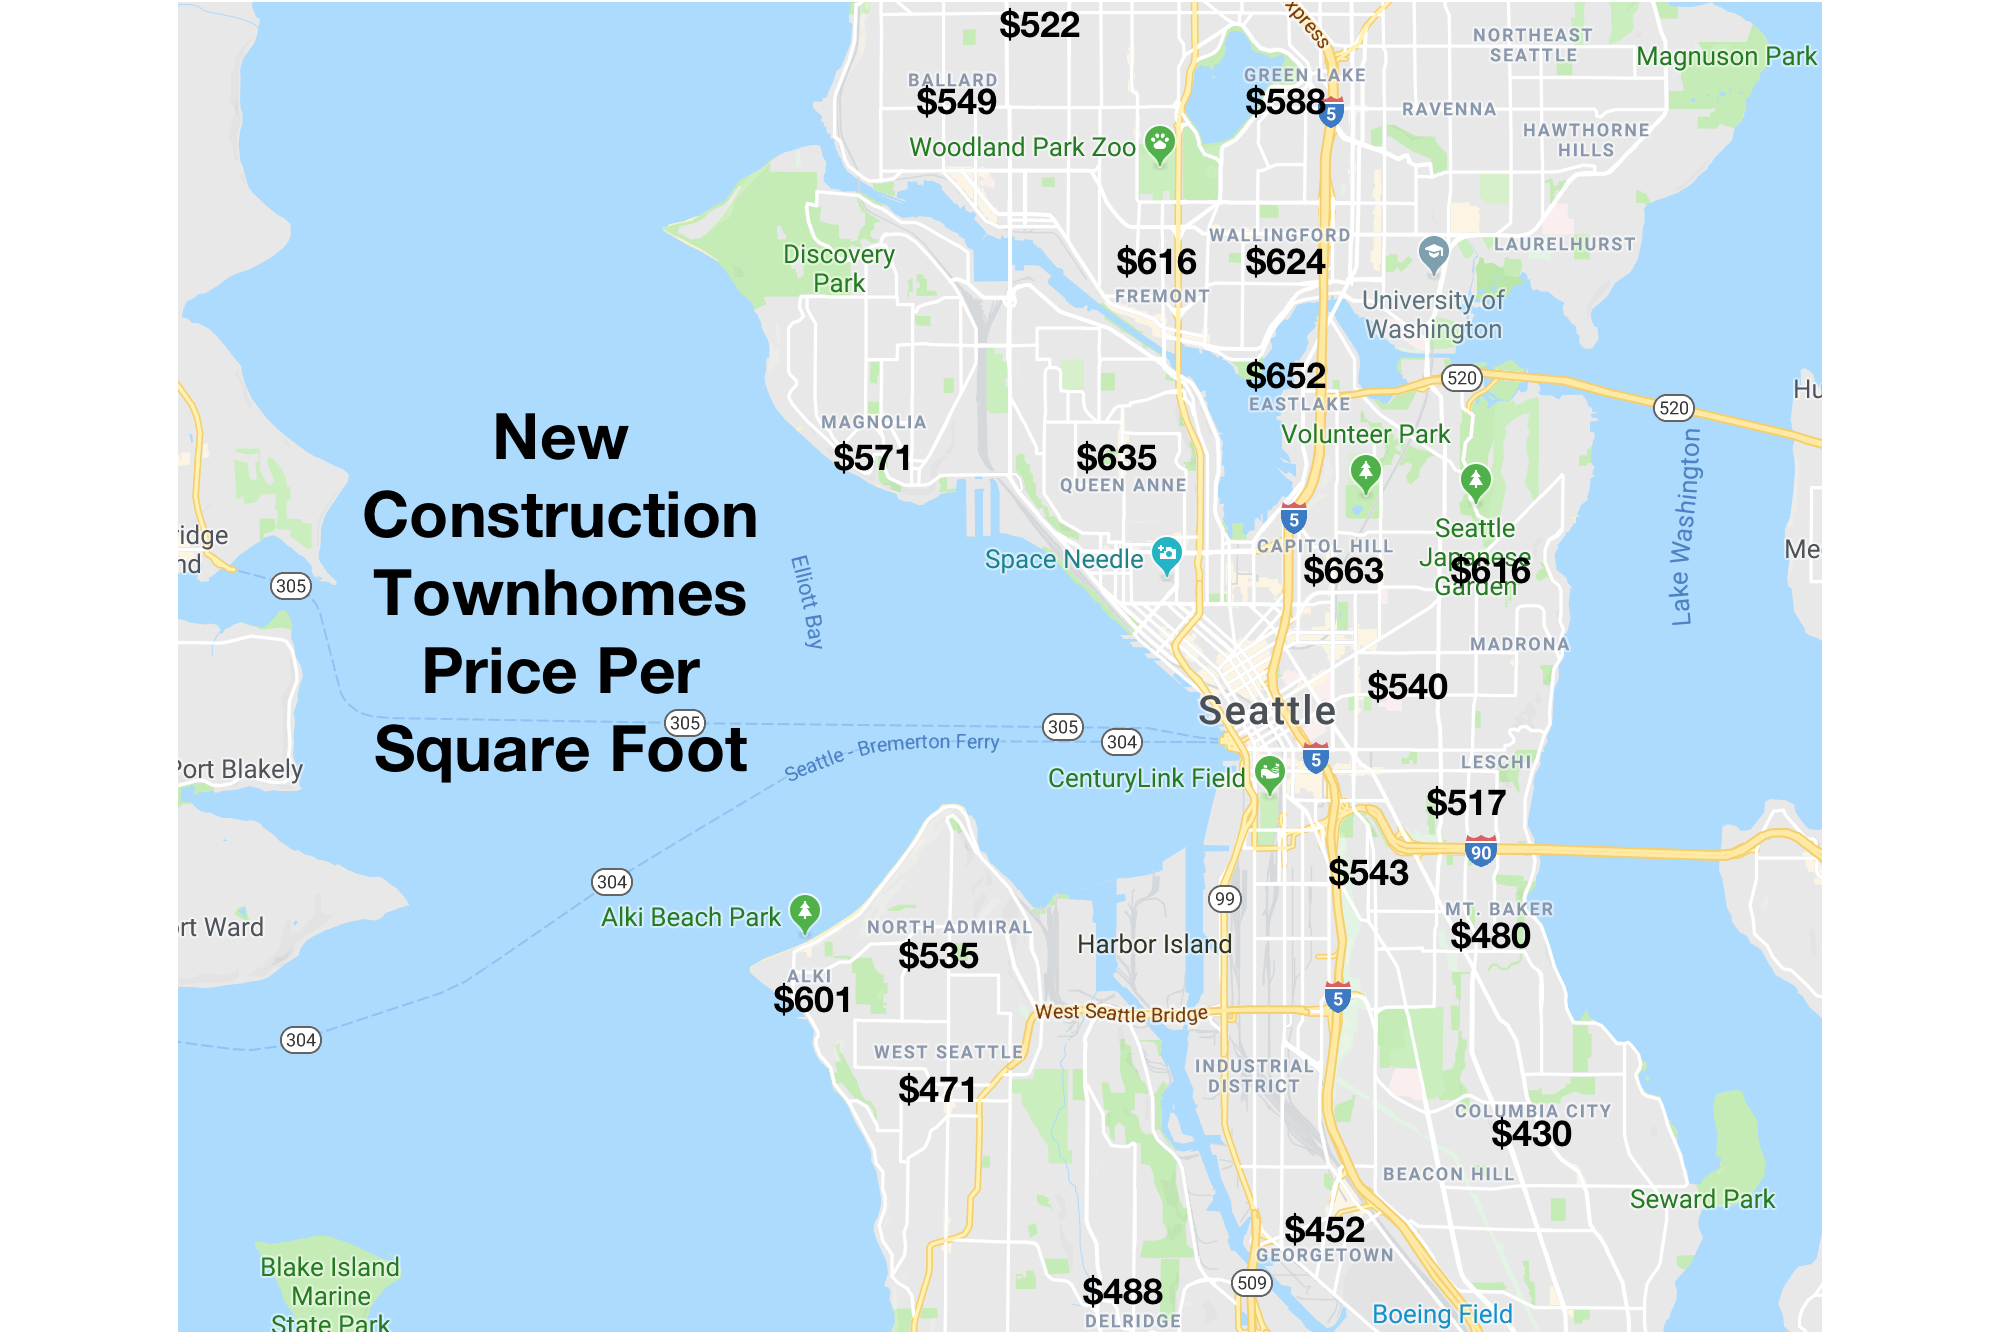 New Construction Townhomes Price Per Square Foot Urban Living